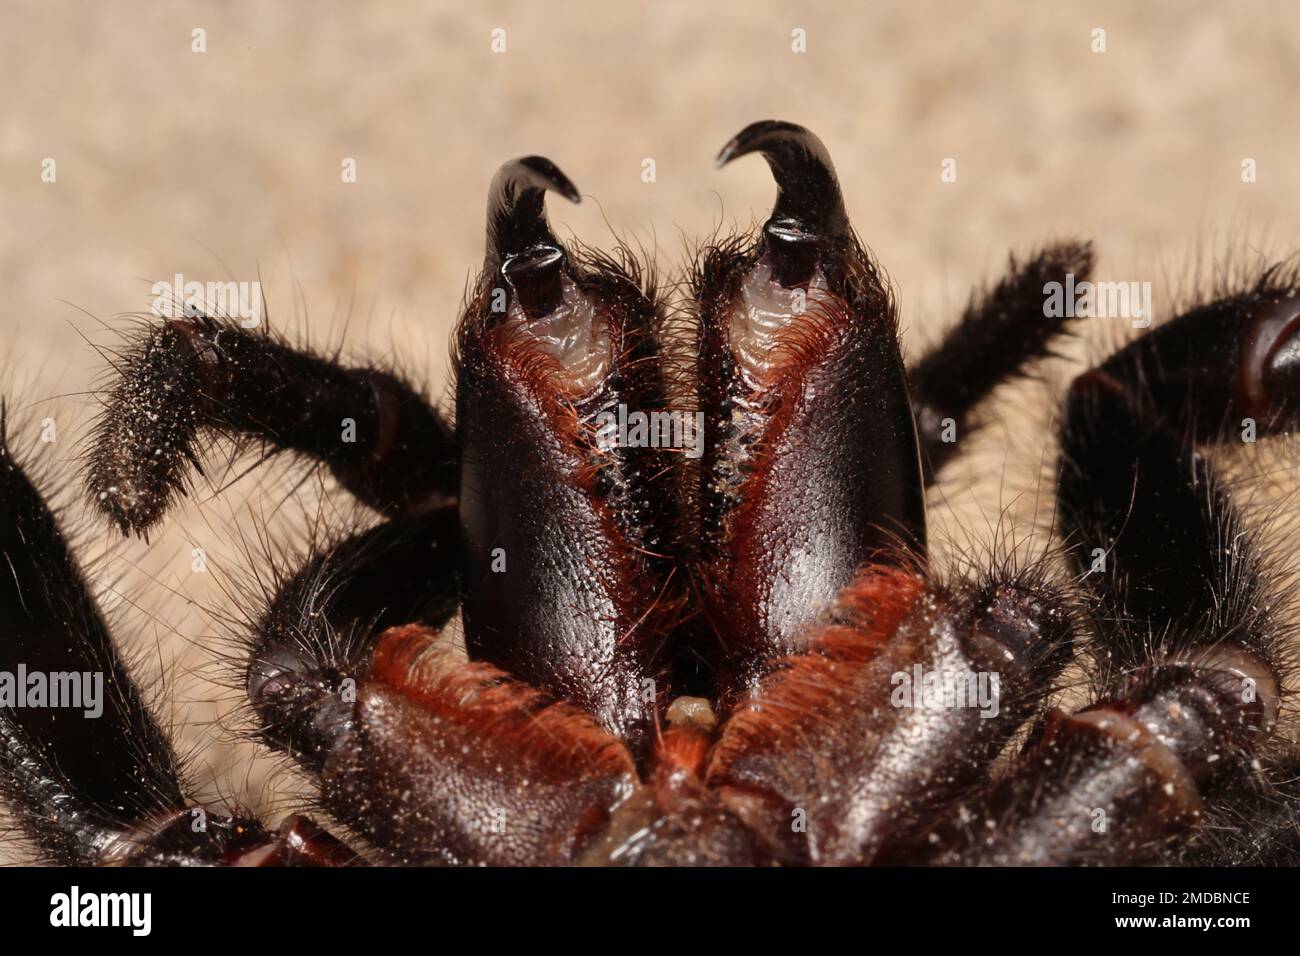 Highly venomous Sydney Funnel Web Spider reared up for striking Stock Photo